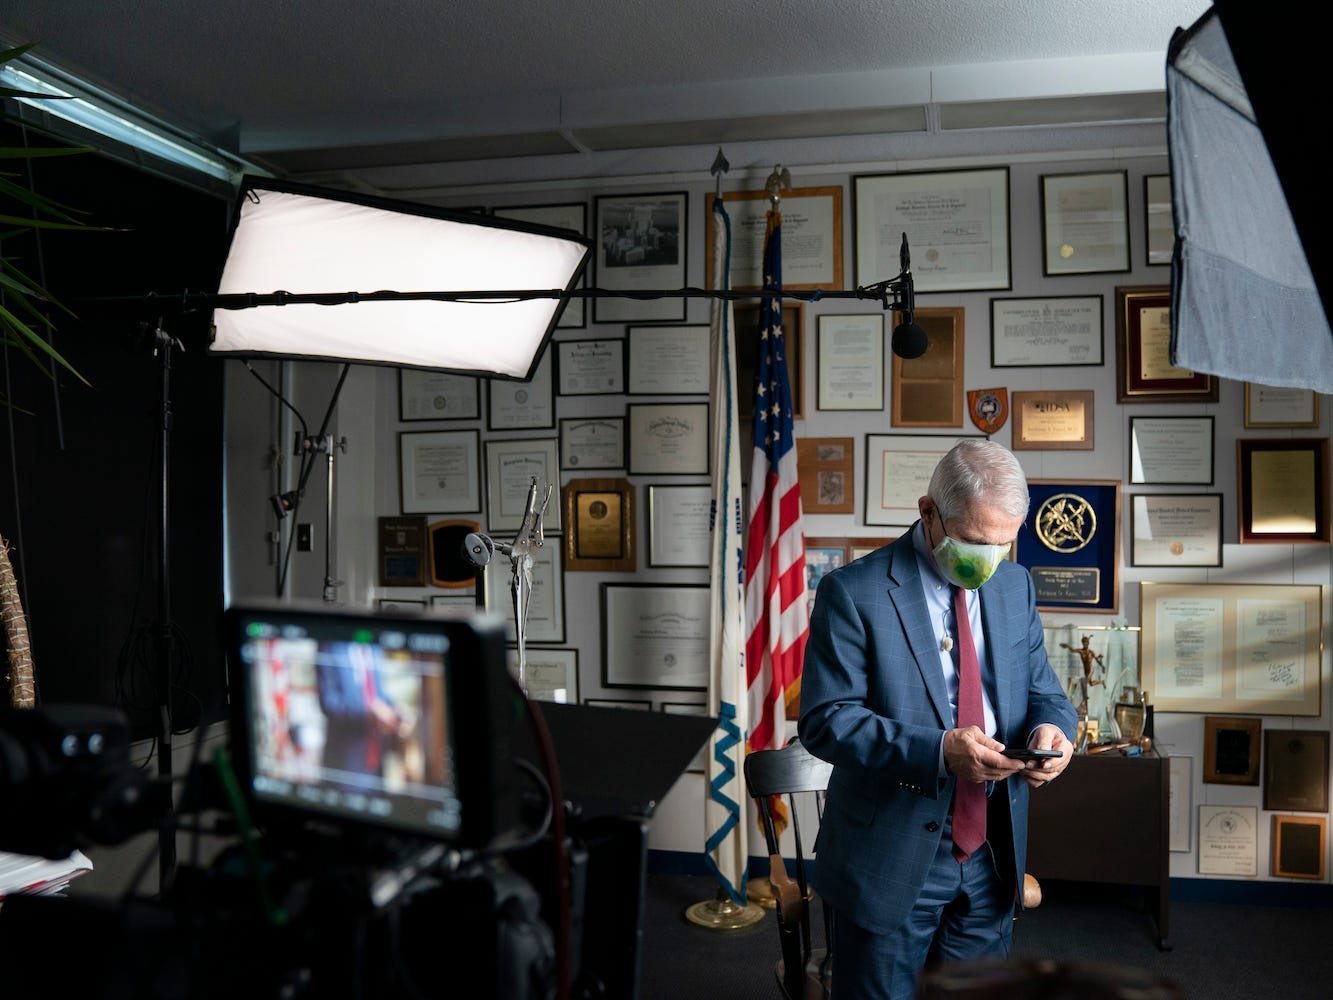 Dr. Anthony Fauci during an interview at the NIH in Bethesda, Maryland.